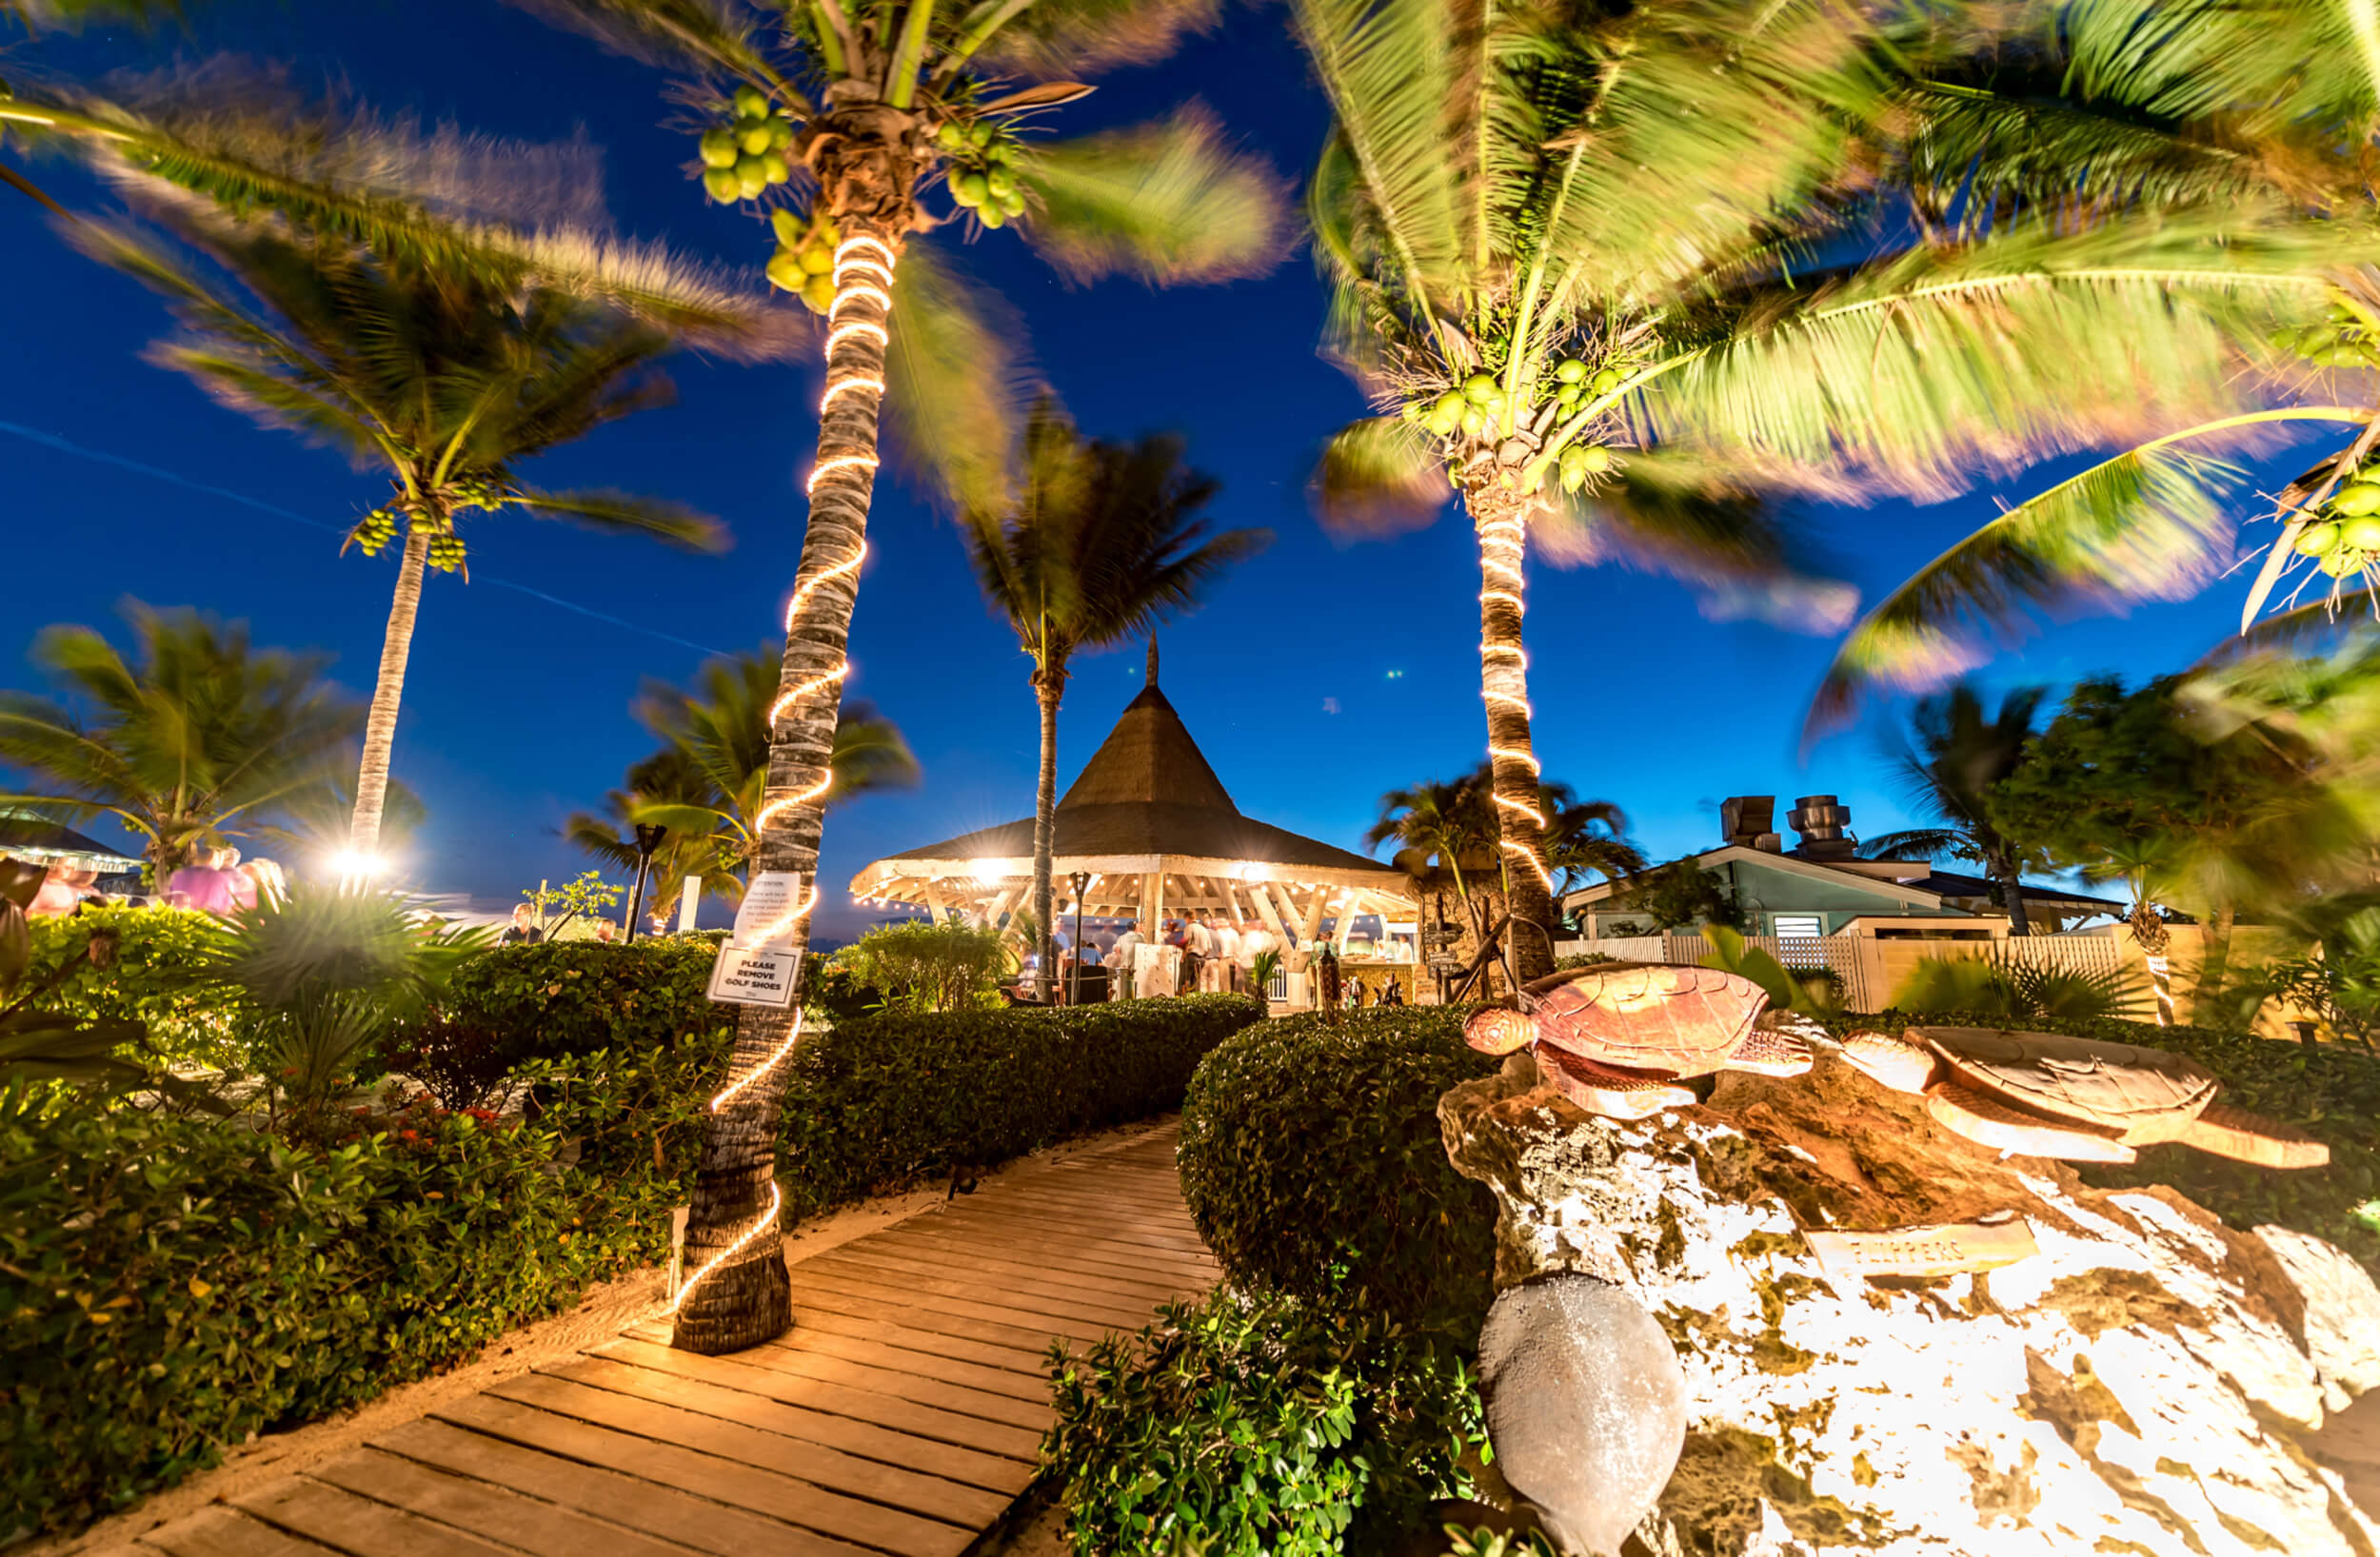 Twilight ambiance at The Abaco Club showcasing the vibrant club lifestyle with tropical landscaping.